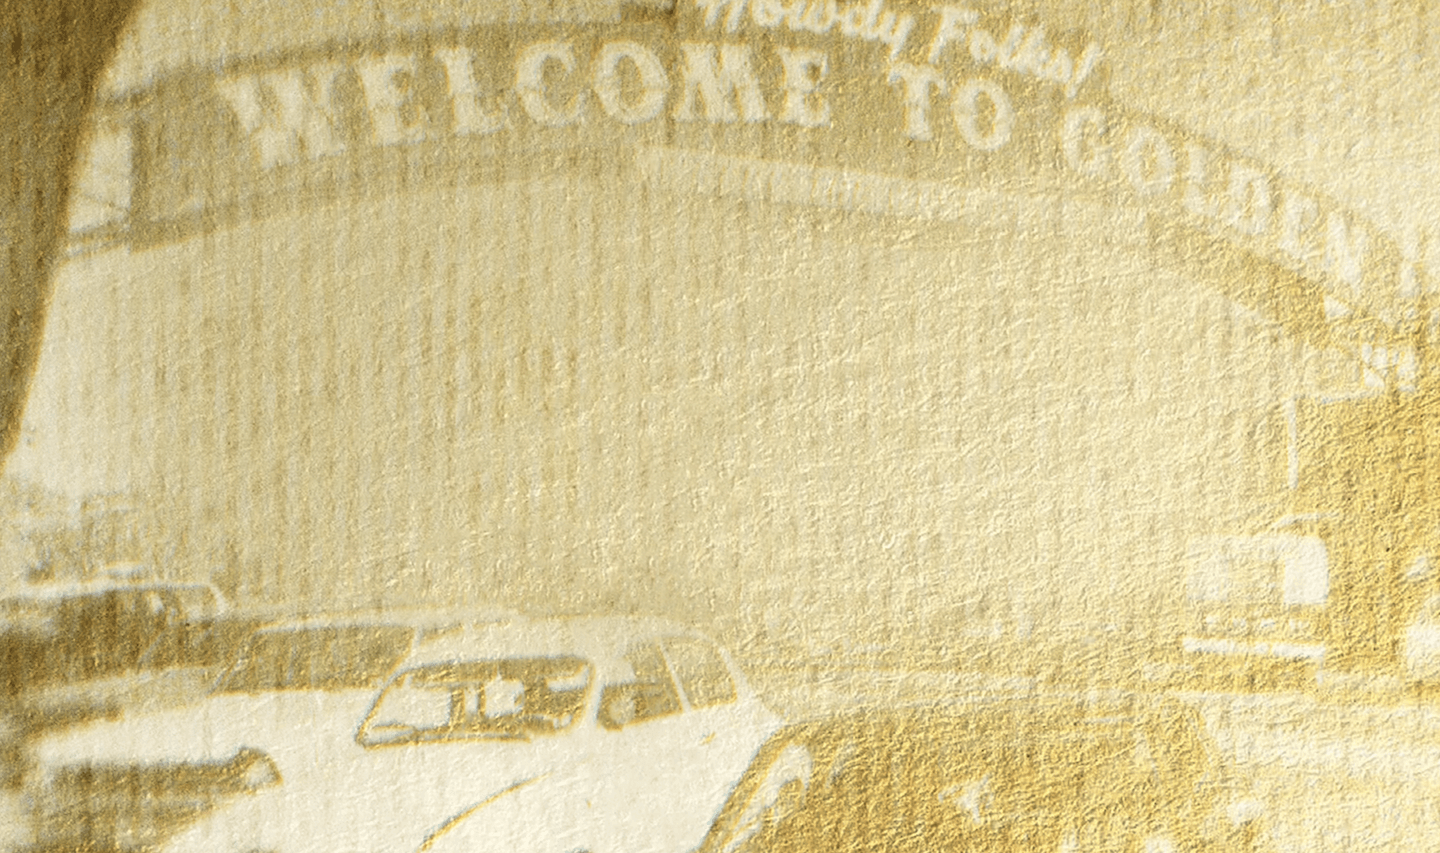 "Welcome to golden" sign